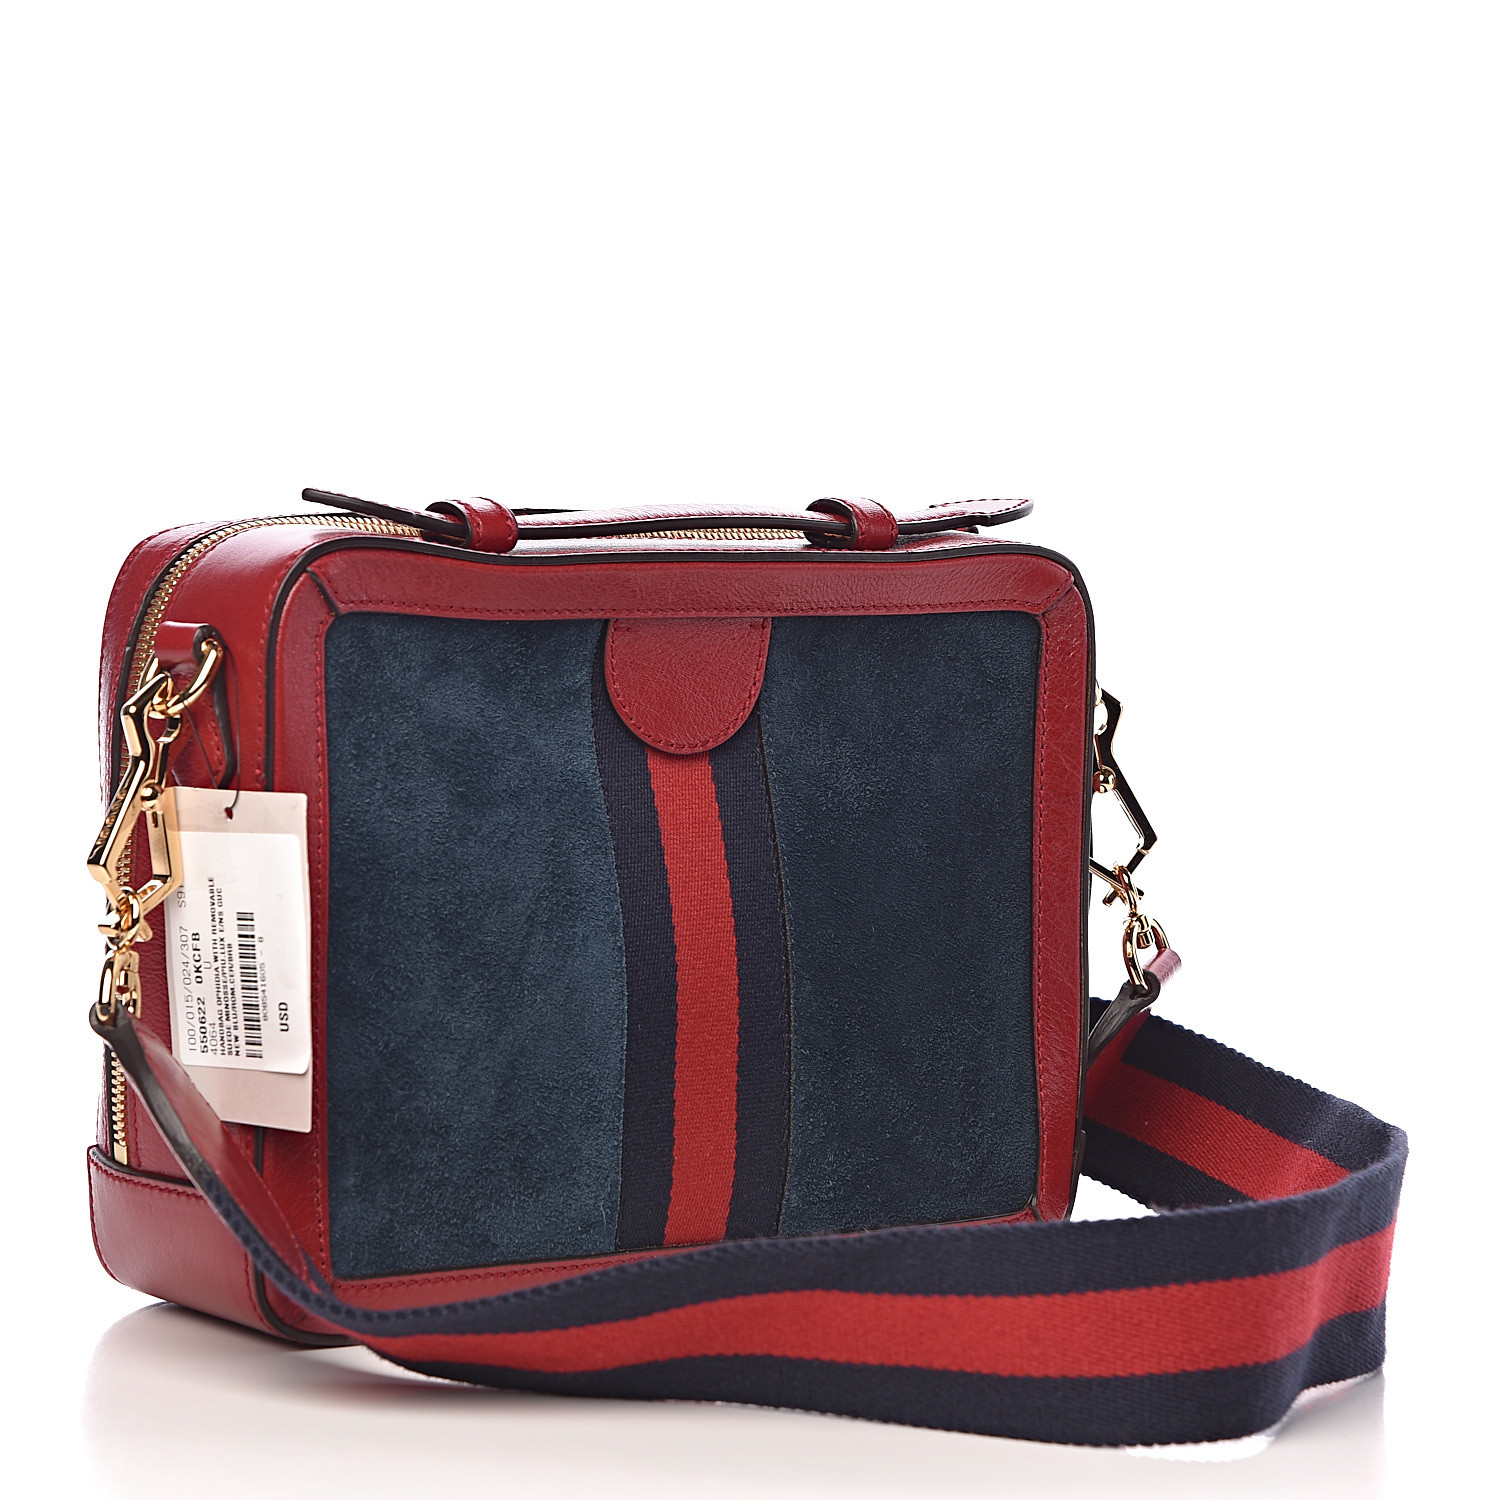 GUCCI Suede Calfskin Small Ophidia Top Handle Bag Red Blue 497124